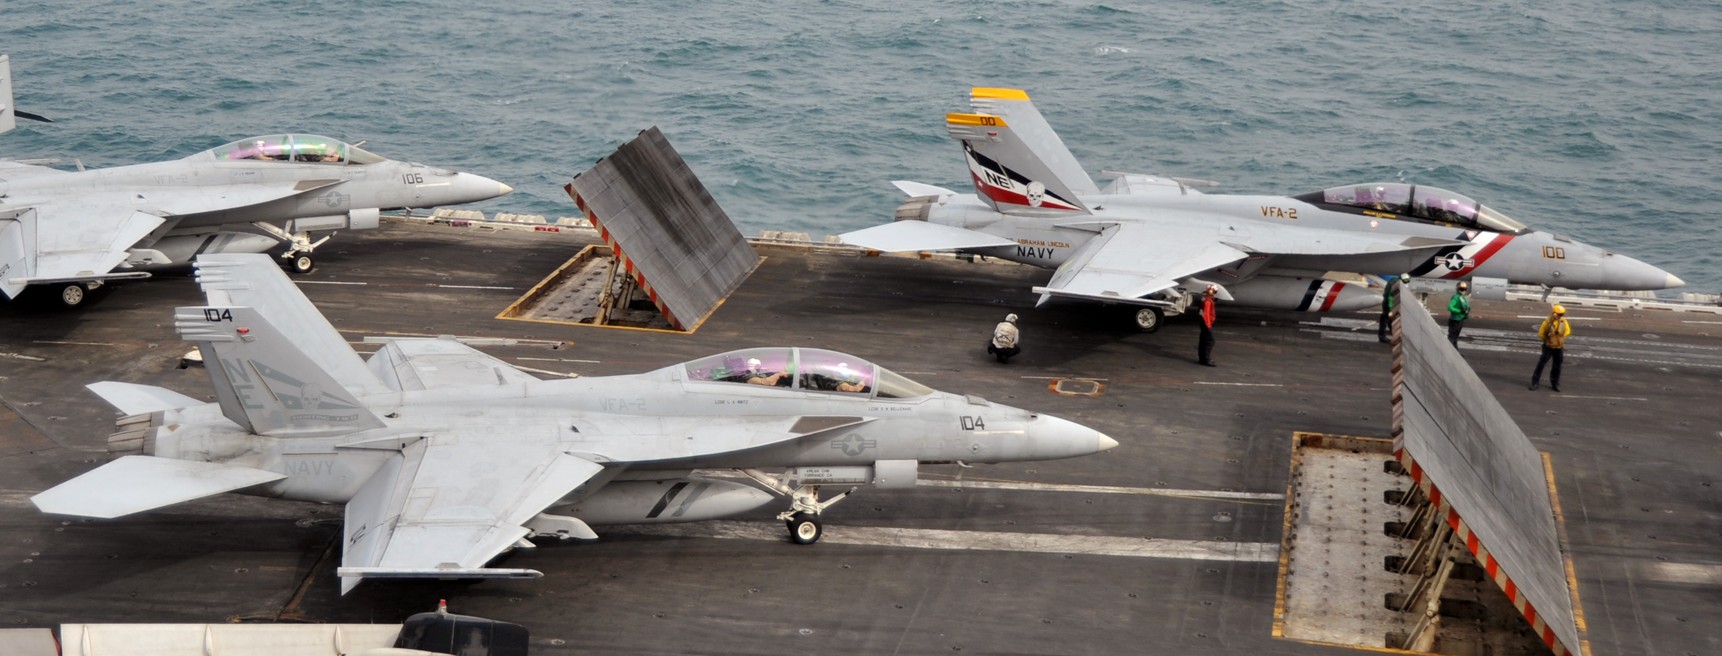 vfa-2 bounty hunters strike fighter squadron us navy f/a-18f super hornet carrier air wing cvw-2 uss abraham lincoln cvn-72 56